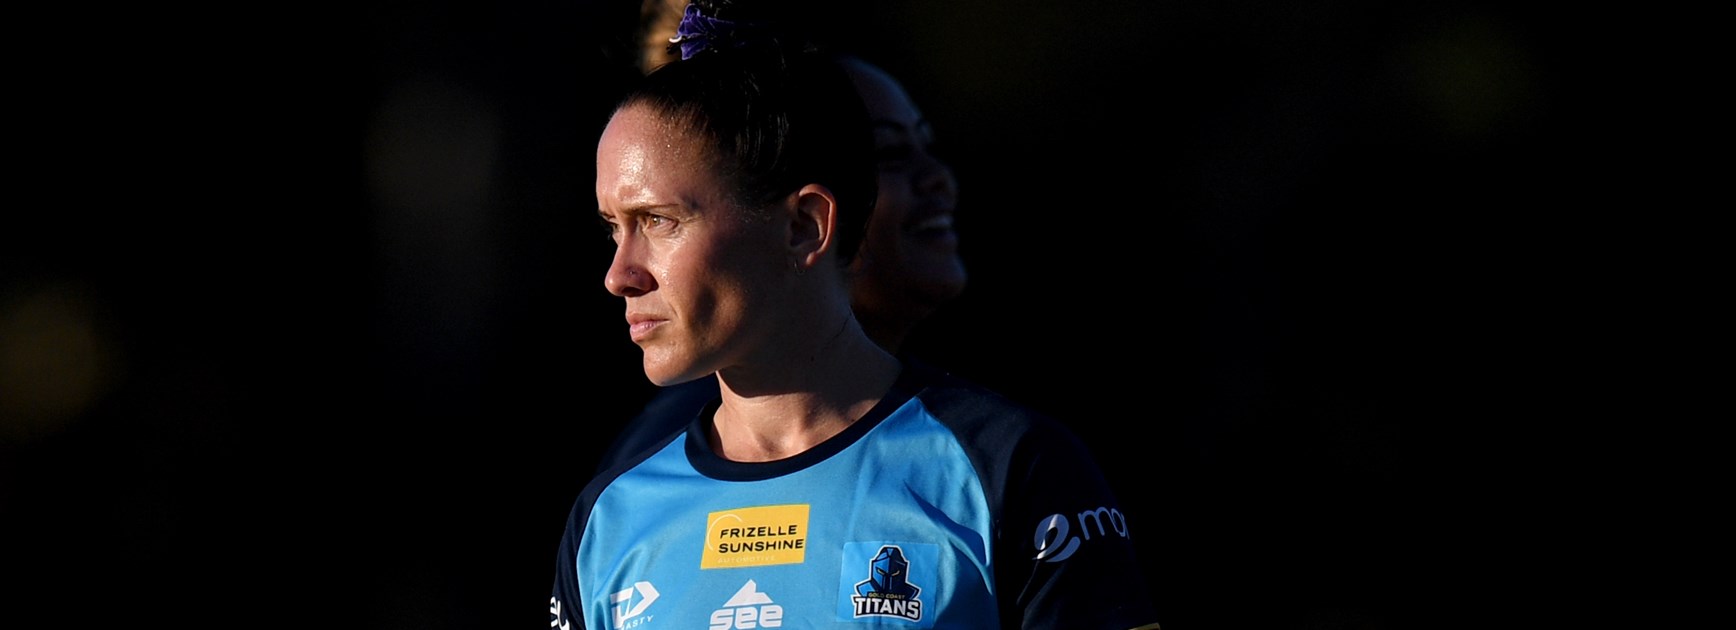 Brittany Breayley-Nati is the Titans inaugural NRLW captain